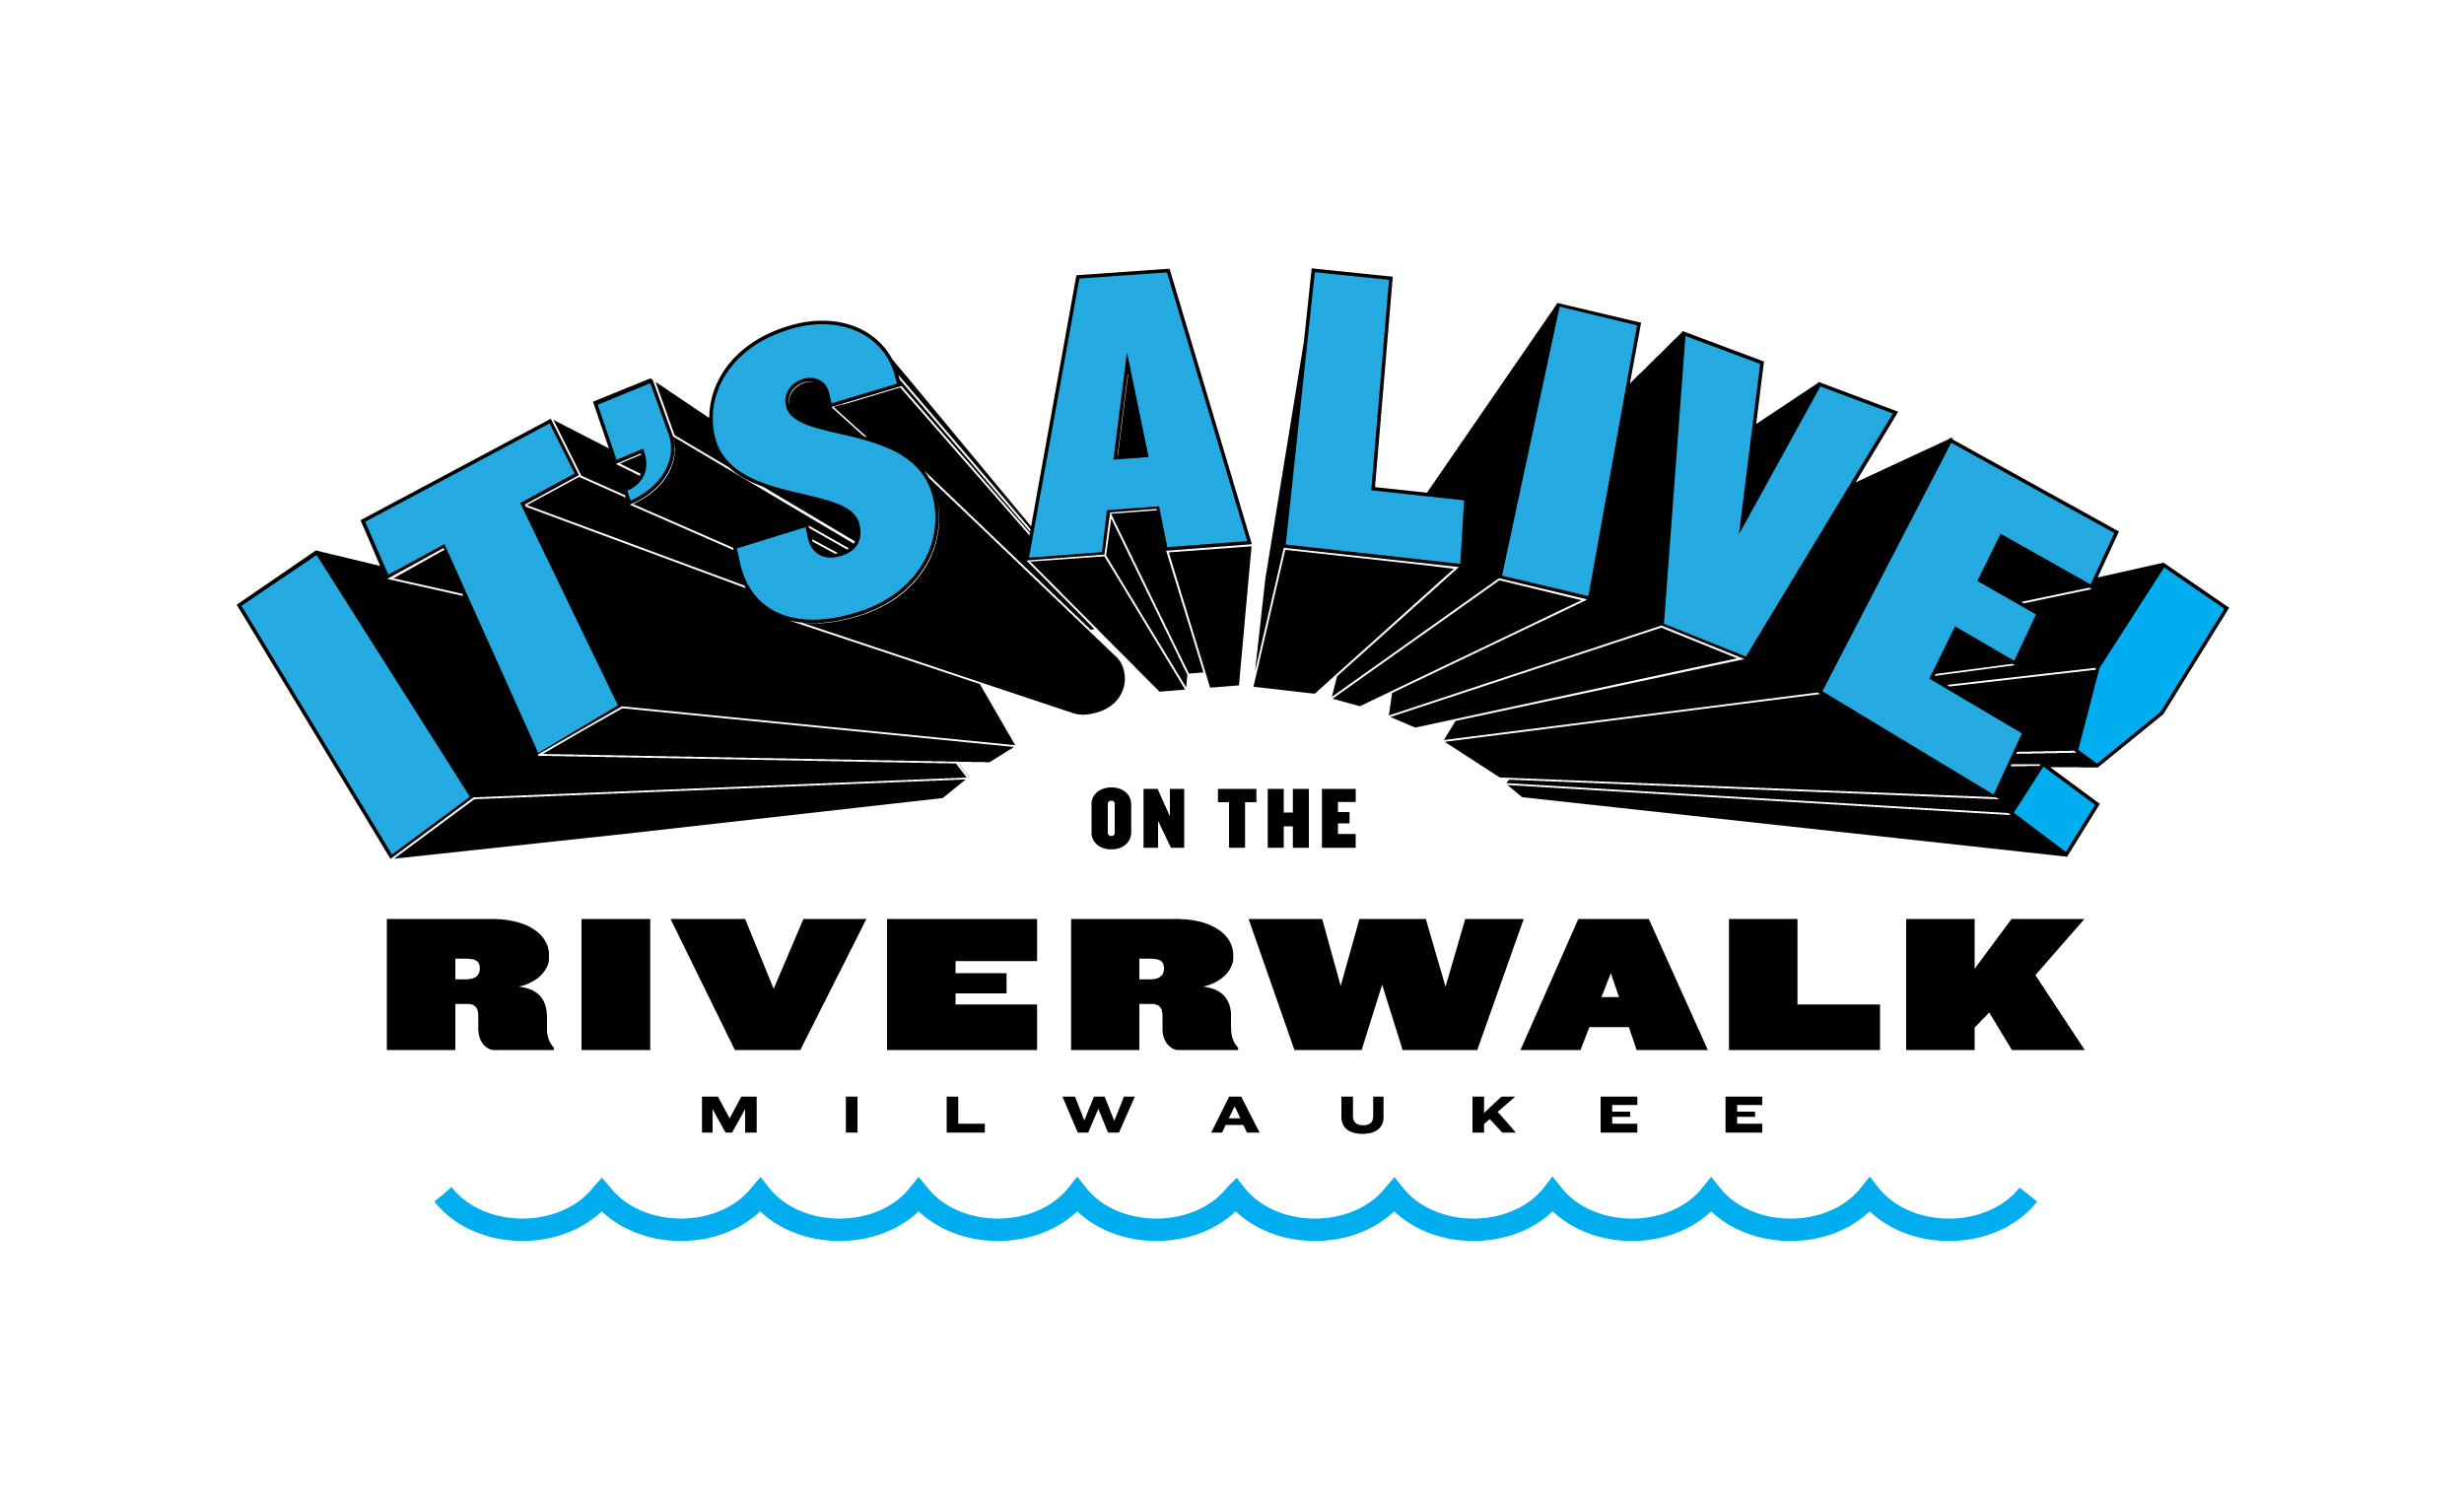 “It’s Alive on the RiverWalk” To Bring Live Performances to the Milwaukee RiverWalk